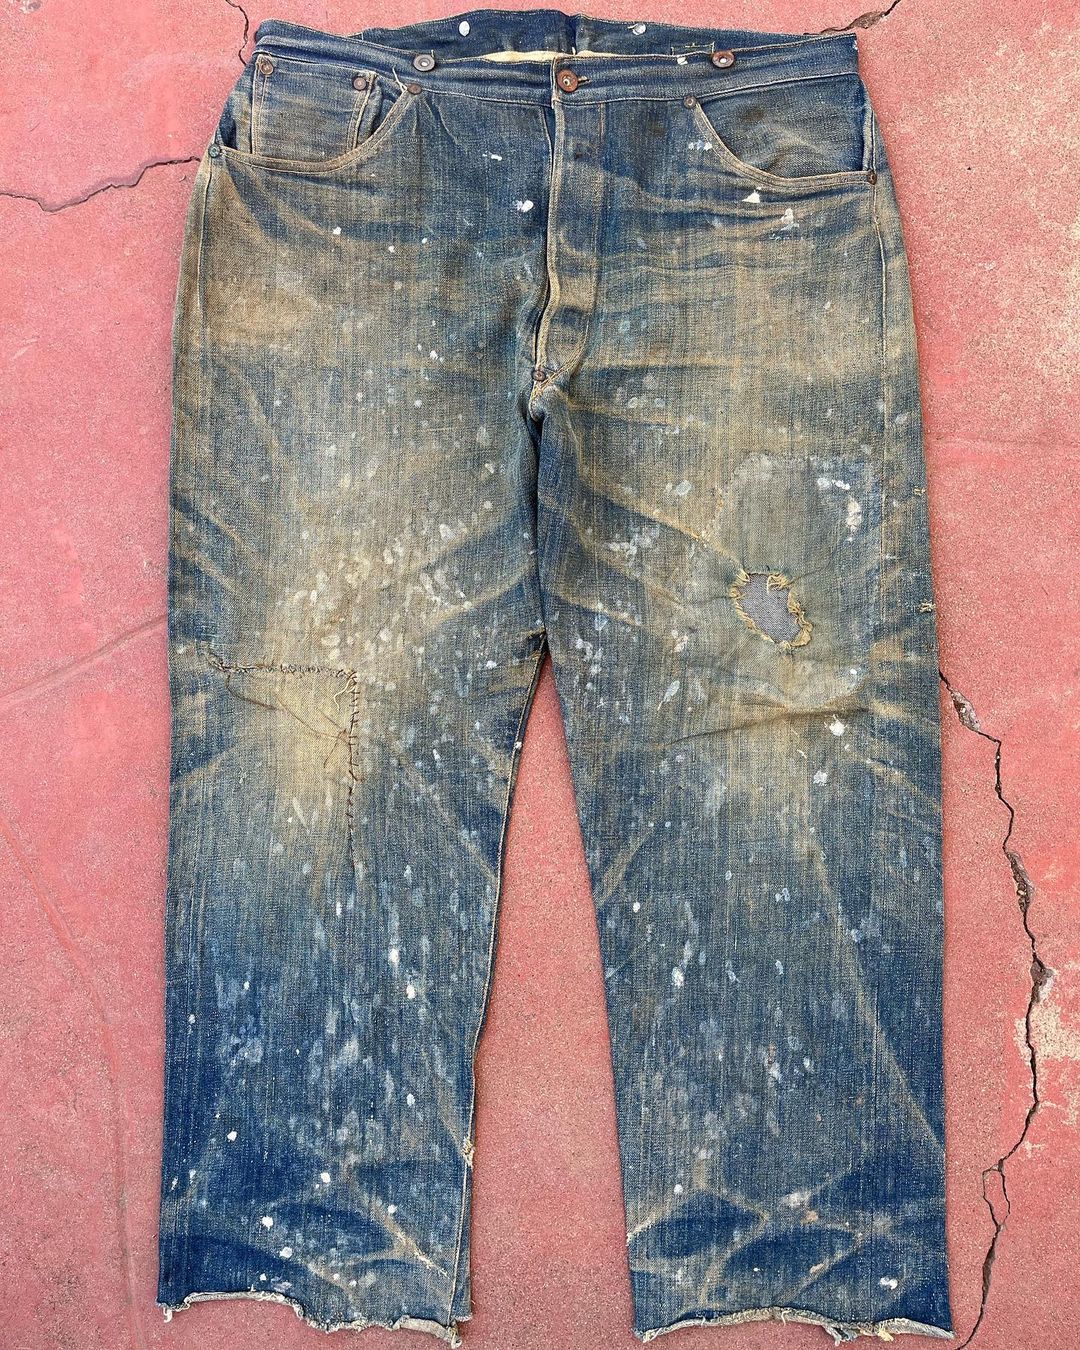 Levi’s jeans from 1880s sells for $76,000 at New Mexico auction